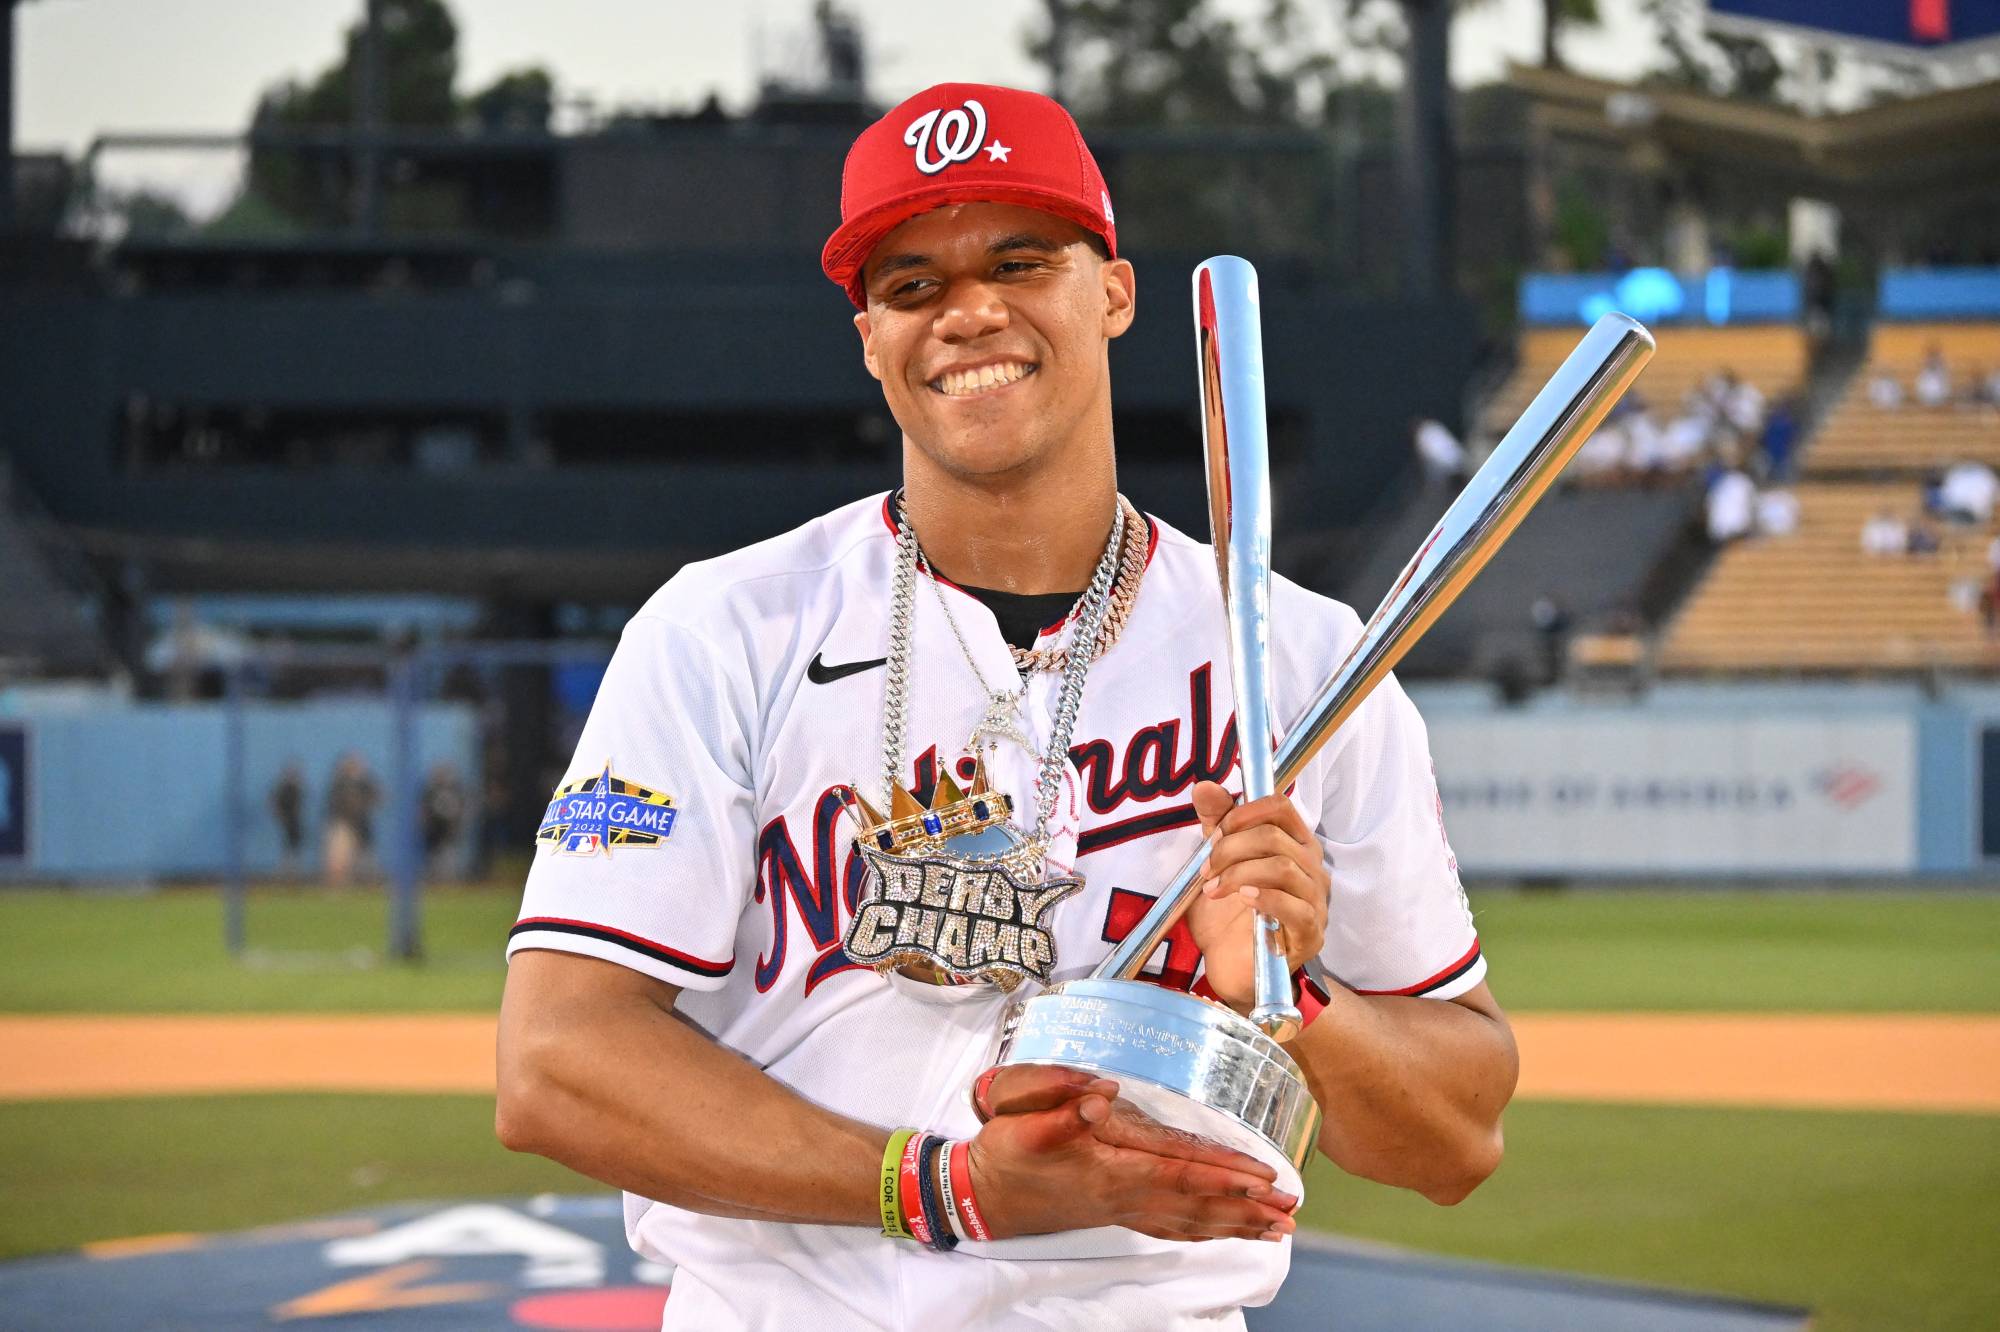 Juan Soto wins the Home Run Derby after a walk-off against Julio